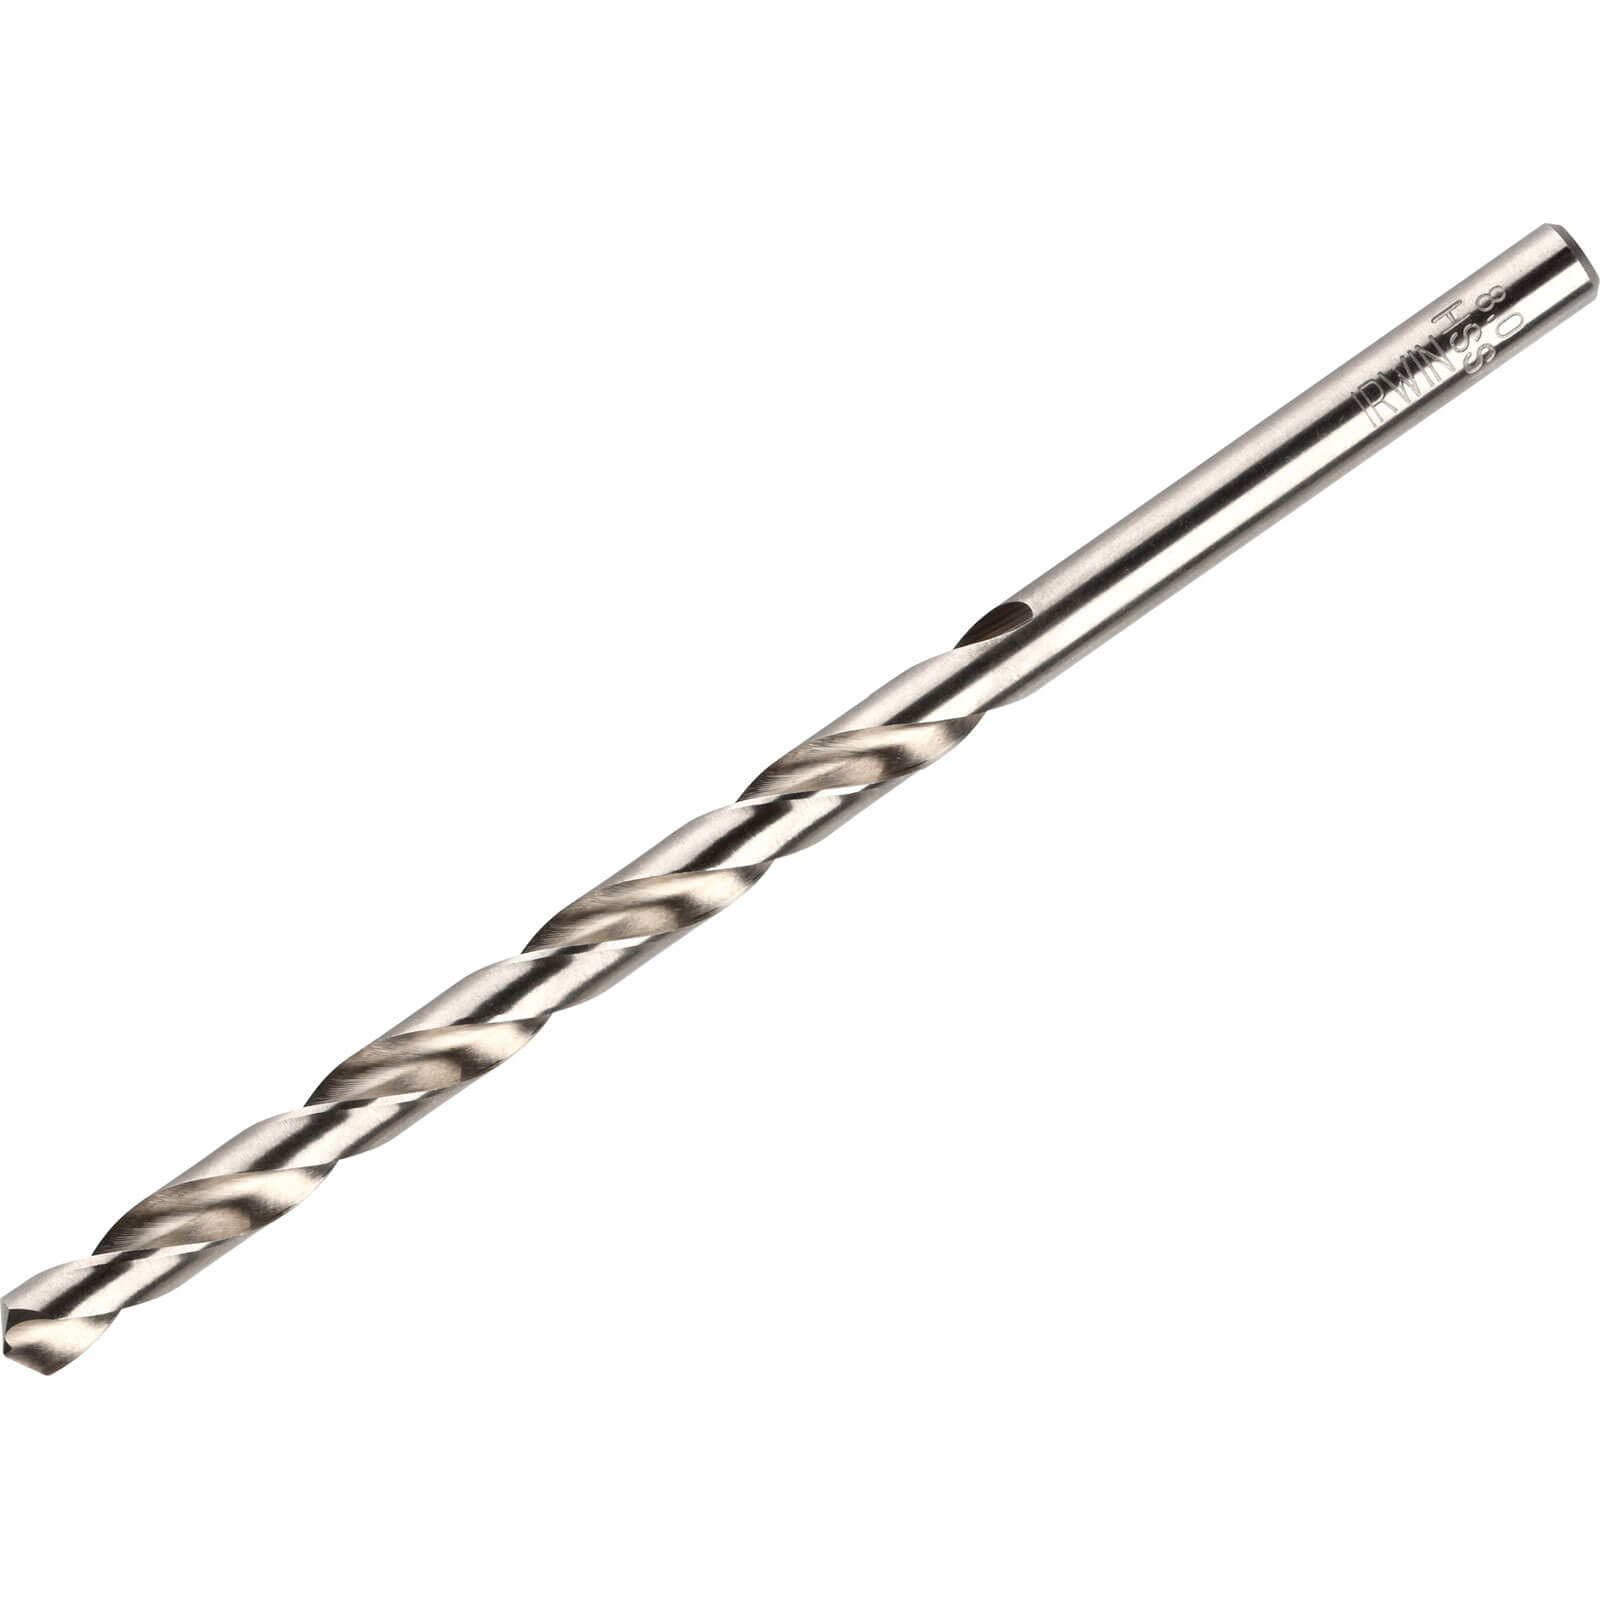 Photo of Irwin Hss Long Pro Drill Bits 7mm Pack Of 10